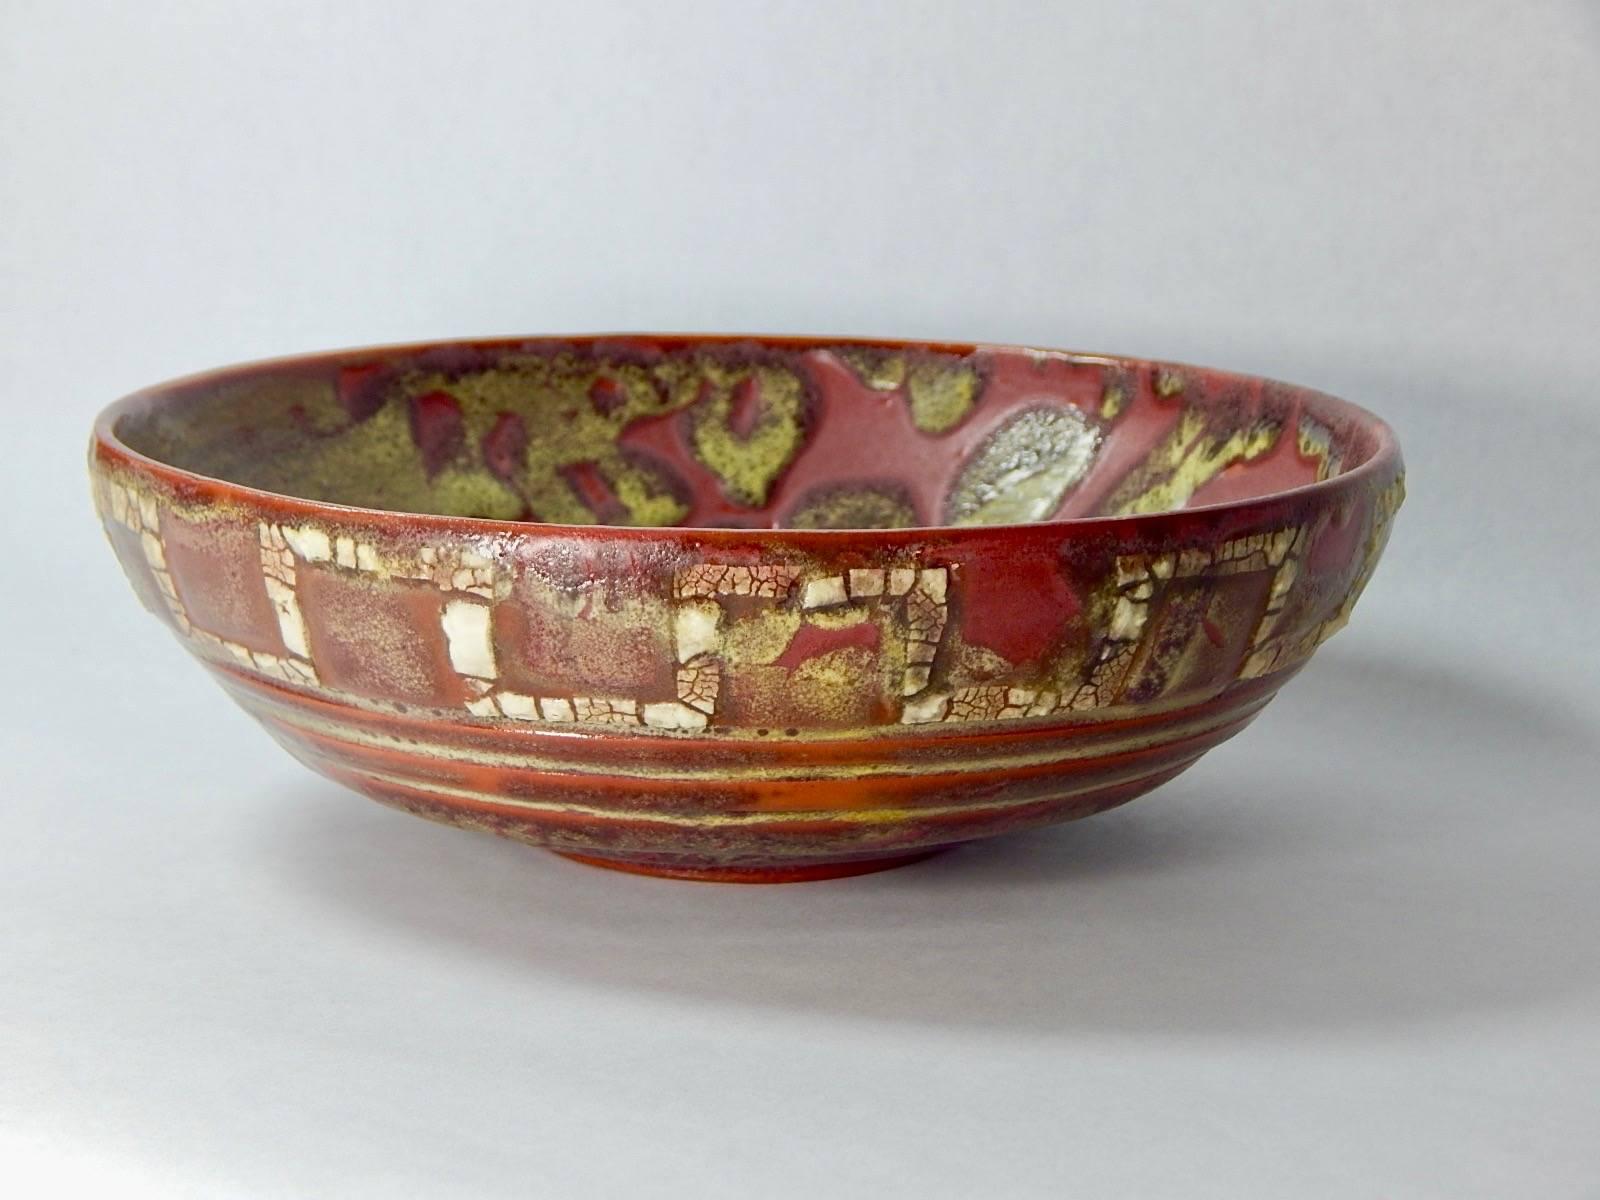 Relicware wheel thrown earthenware bowl by Andrew Wilder # 88. In terra cotta with dark red and mustard yellow glaze and white lichen overglaze . We can produce commissions to order in this series. Made by hand in Los Angeles, California 2017